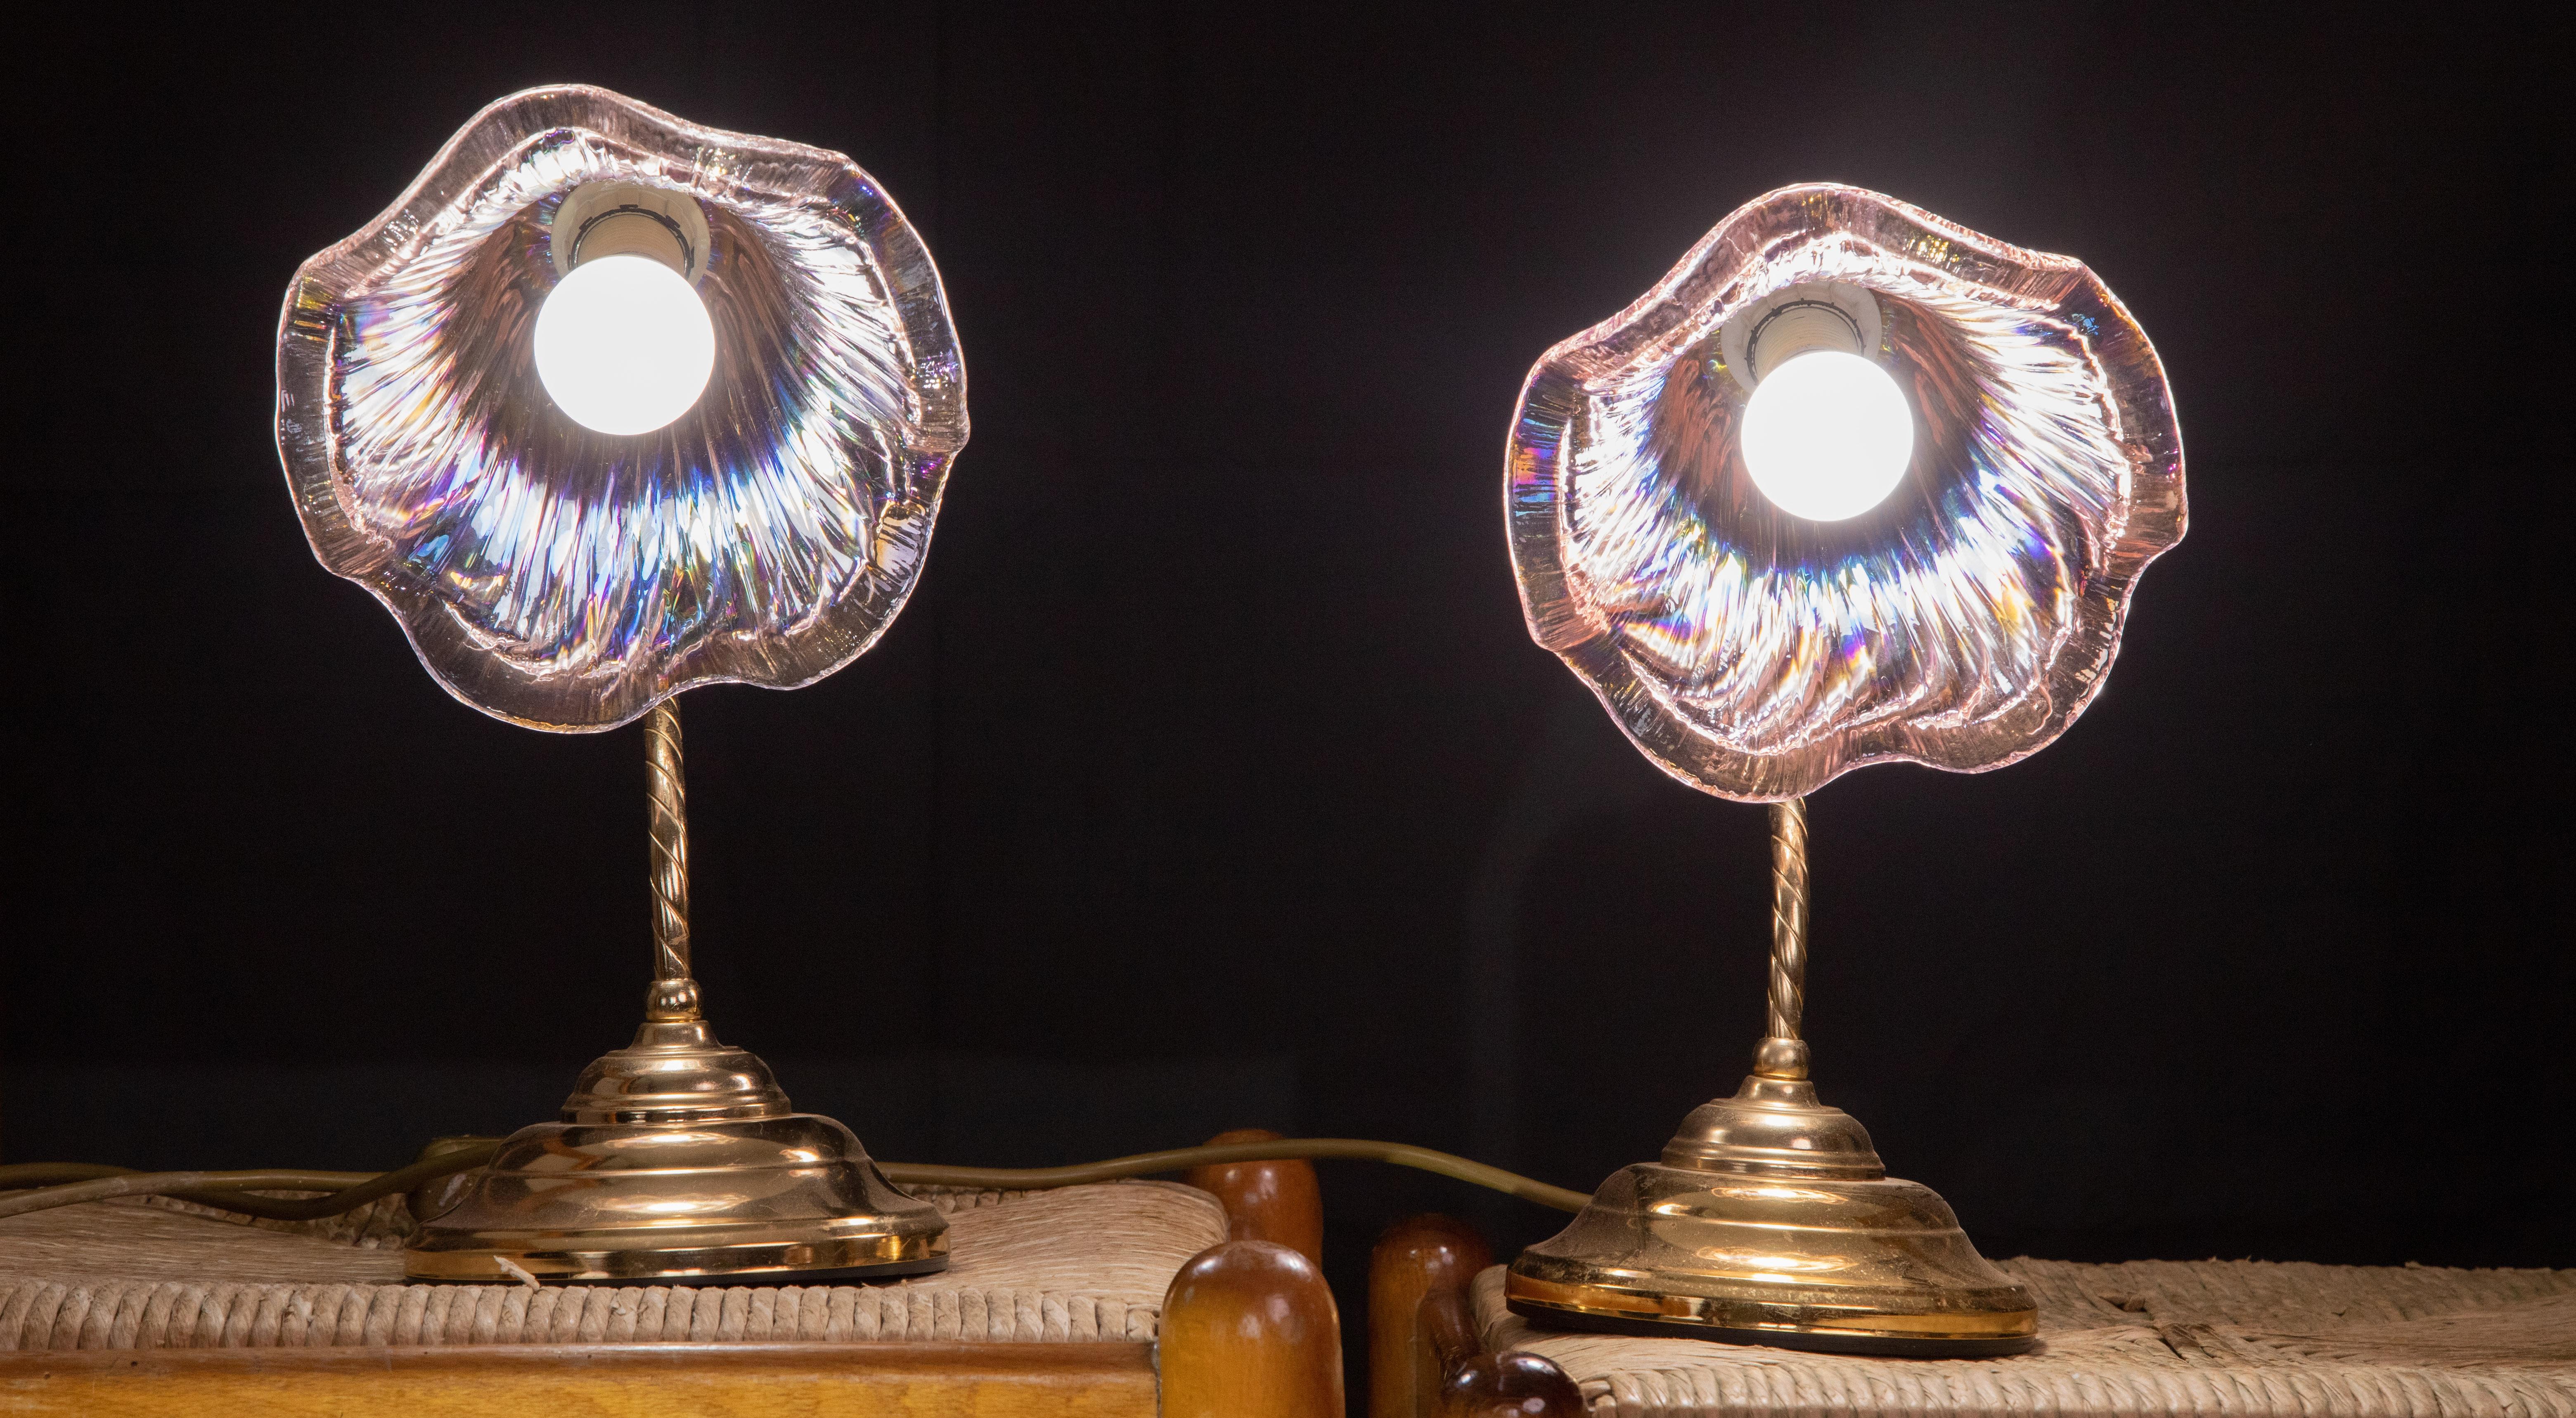 Pair of brass and rare iridescent pink glass abat-jours typical of Venetian production.
Connection two e14 lamp holders.